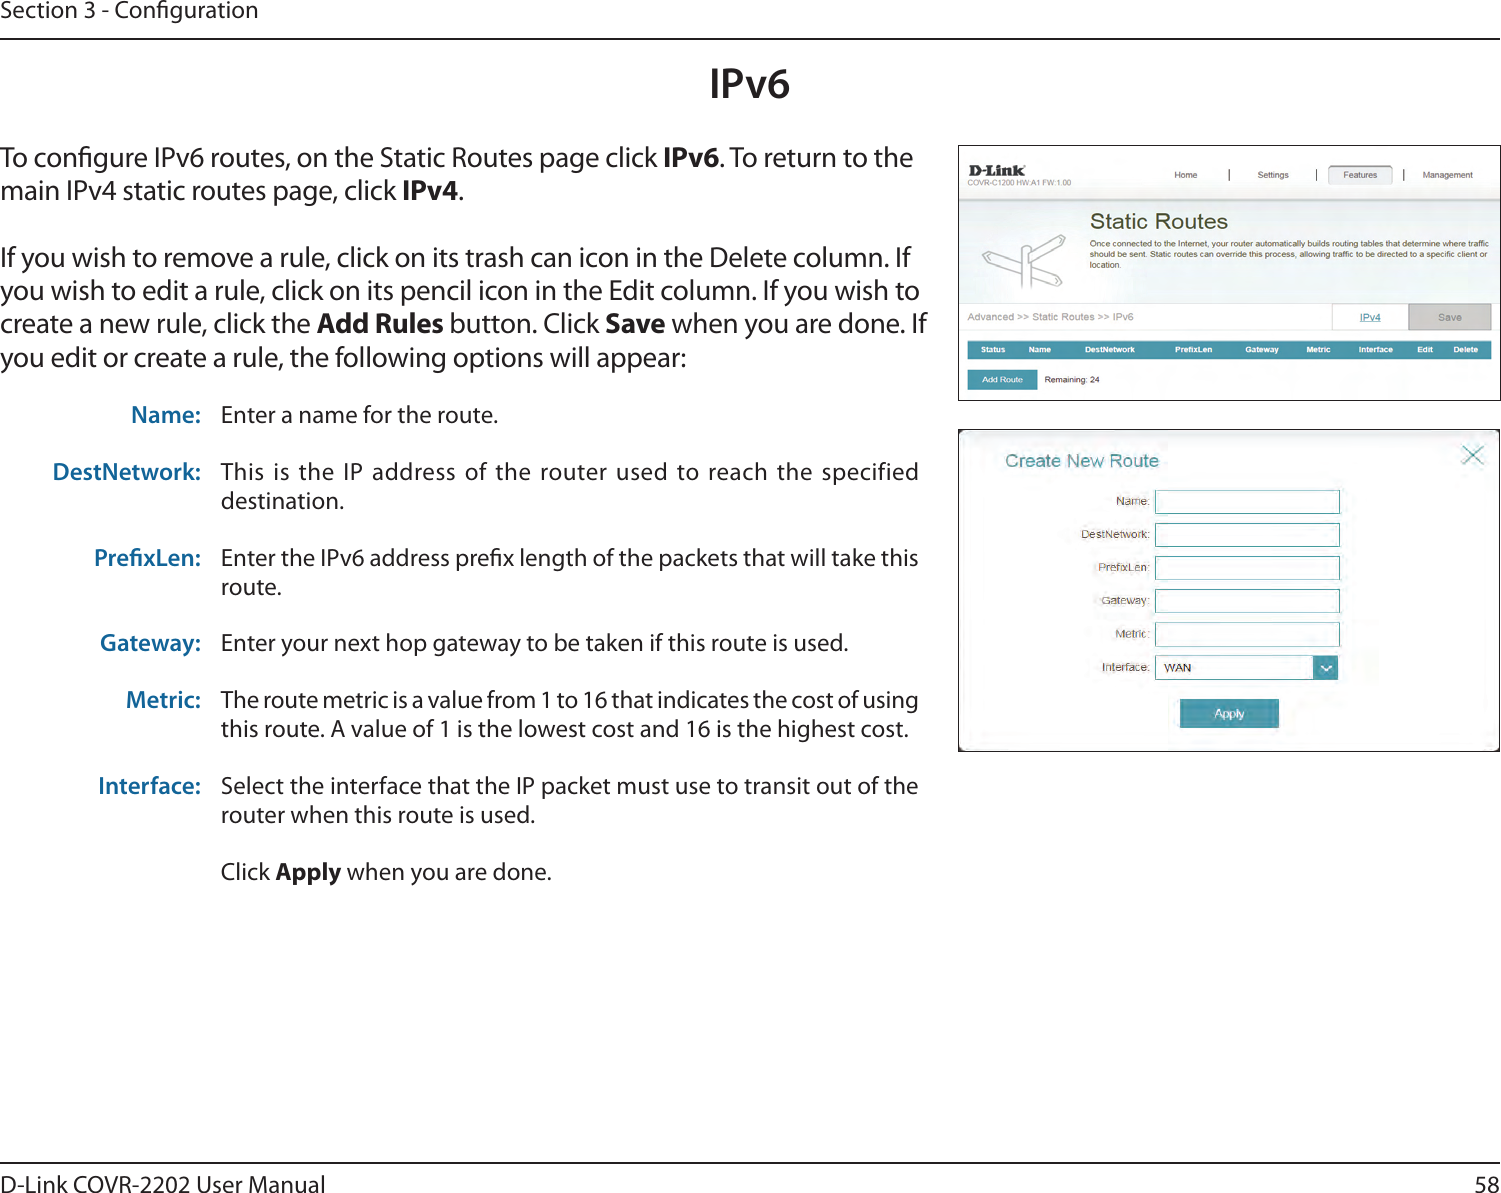 58D-Link COVR-2202 User ManualSection 3 - CongurationTo congure IPv6 routes, on the Static Routes page click IPv6. To return to the main IPv4 static routes page, click IPv4.If you wish to remove a rule, click on its trash can icon in the Delete column. If you wish to edit a rule, click on its pencil icon in the Edit column. If you wish to create a new rule, click the Add Rules button. Click Save when you are done. If you edit or create a rule, the following options will appear:Name: Enter a name for the route.DestNetwork: This is the IP address of the router used to reach the specified destination.PrexLen: Enter the IPv6 address prex length of the packets that will take this route. Gateway: Enter your next hop gateway to be taken if this route is used.Metric: The route metric is a value from 1 to 16 that indicates the cost of using this route. A value of 1 is the lowest cost and 16 is the highest cost.Interface: Select the interface that the IP packet must use to transit out of the router when this route is used.Click Apply when you are done.IPv6